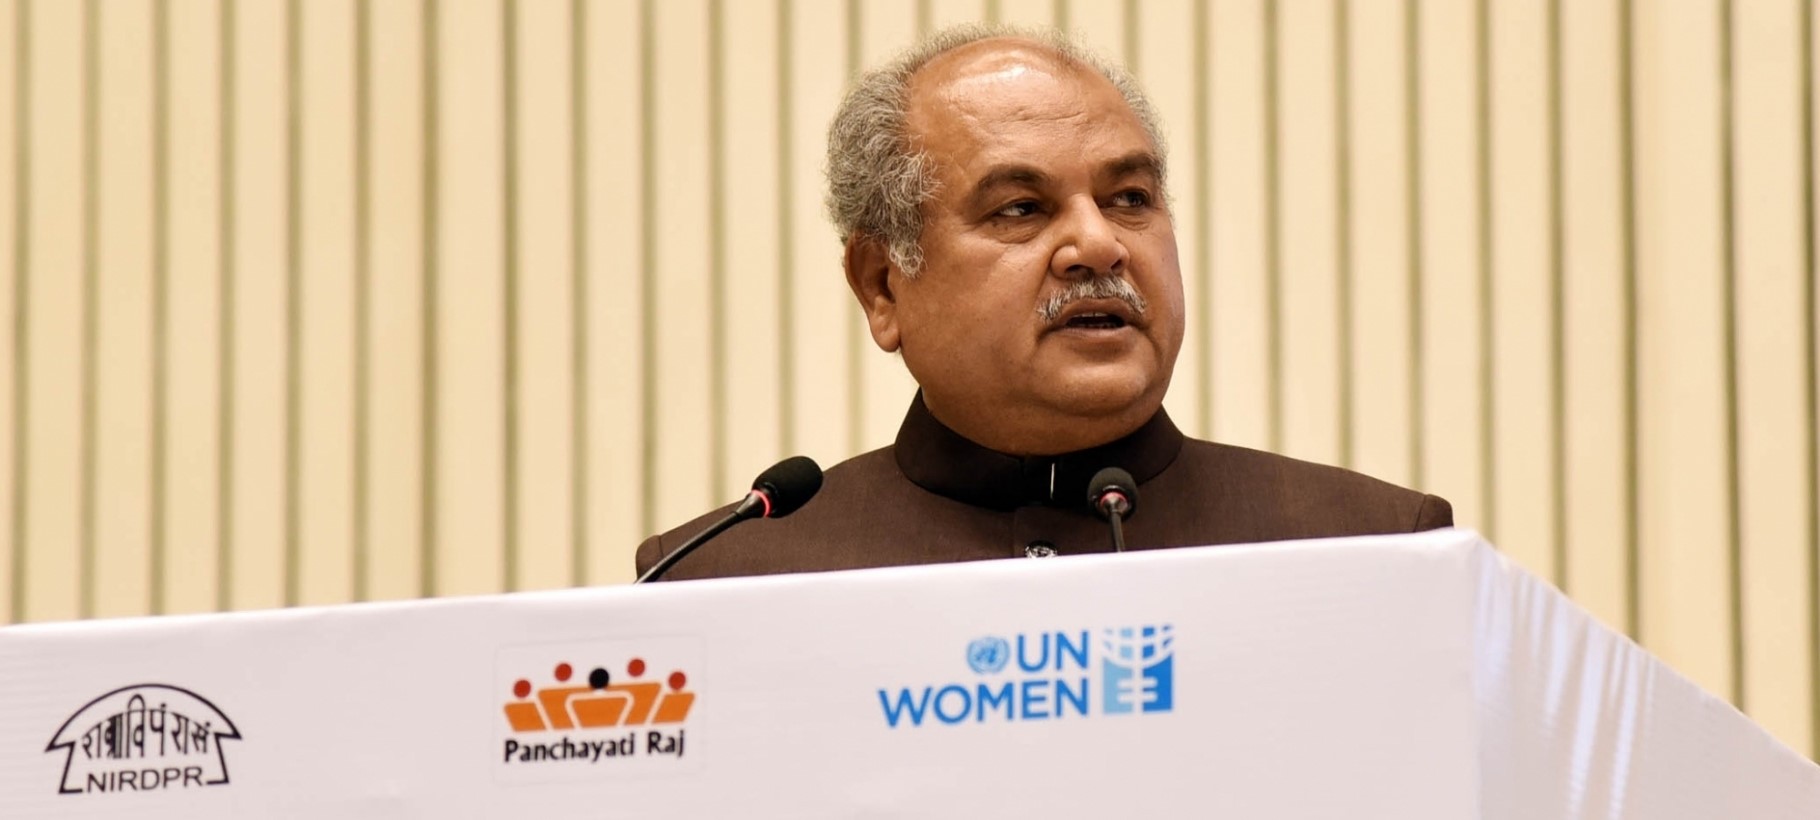 Shortfall in paddy sowing likely to be covered in kharif season: Narendra Singh Tomar